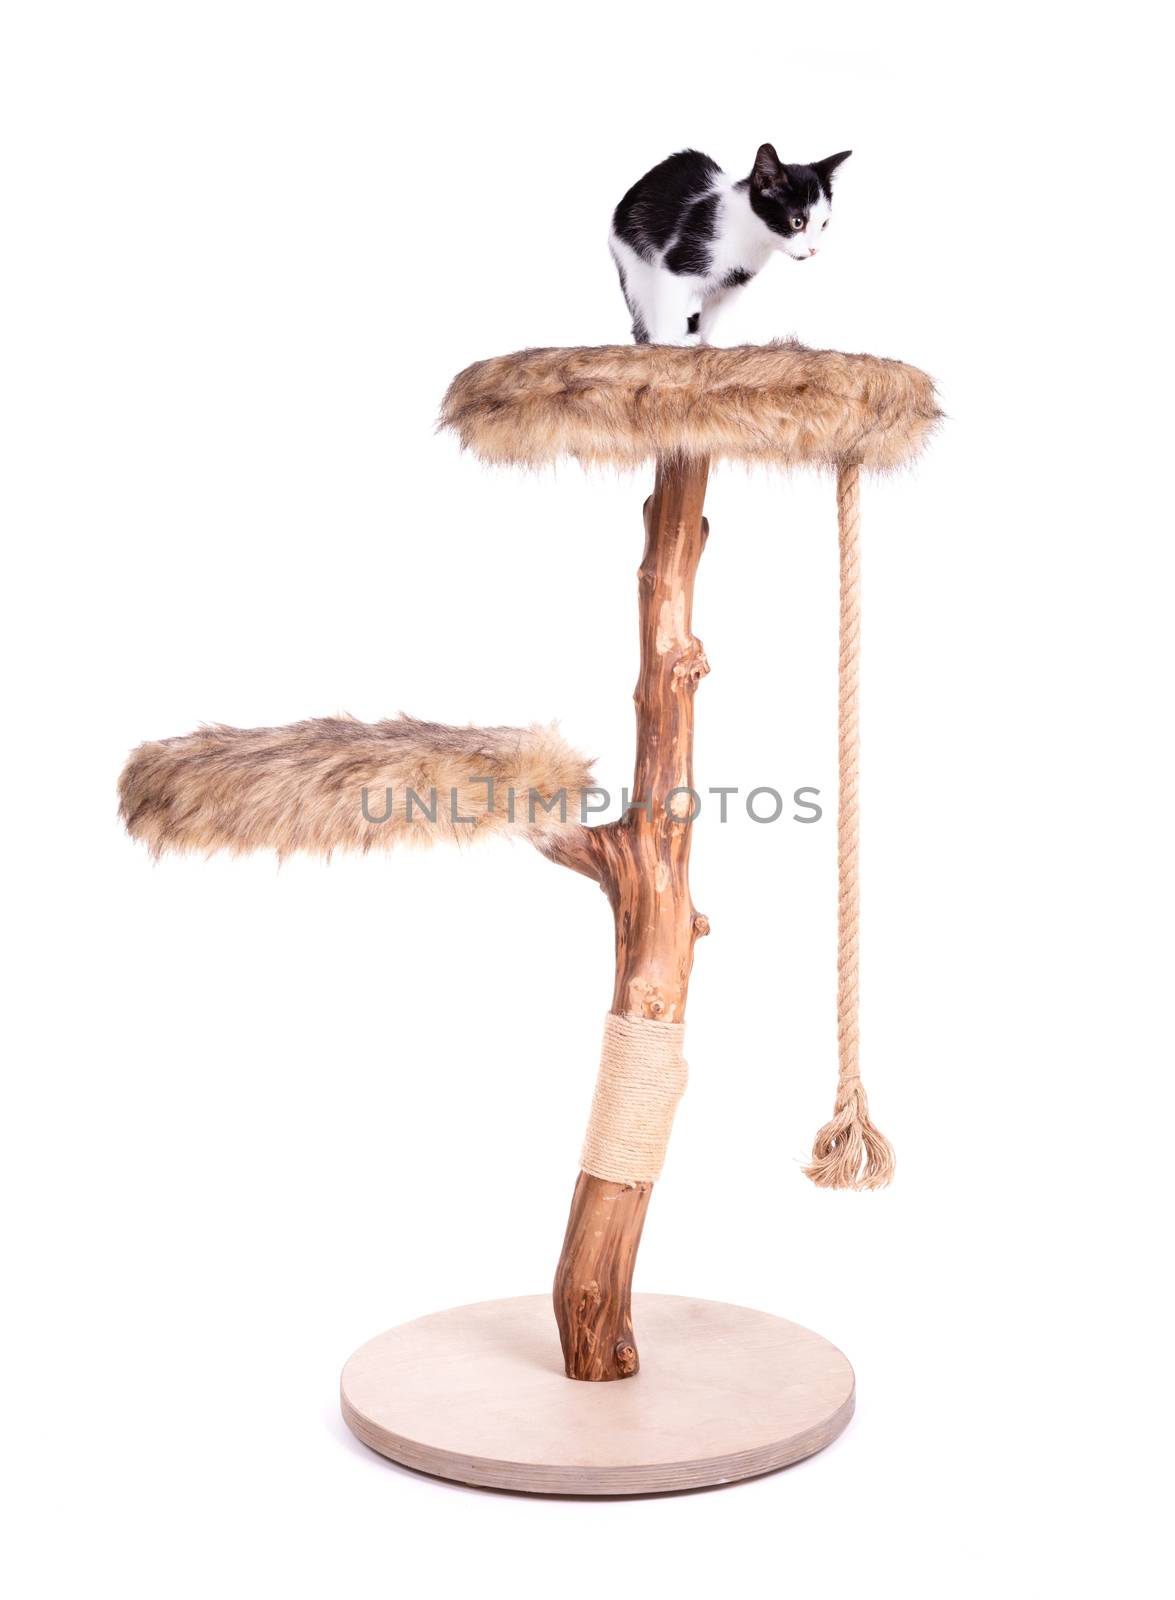 Black and white kitten on a modern scratch pole by michaklootwijk